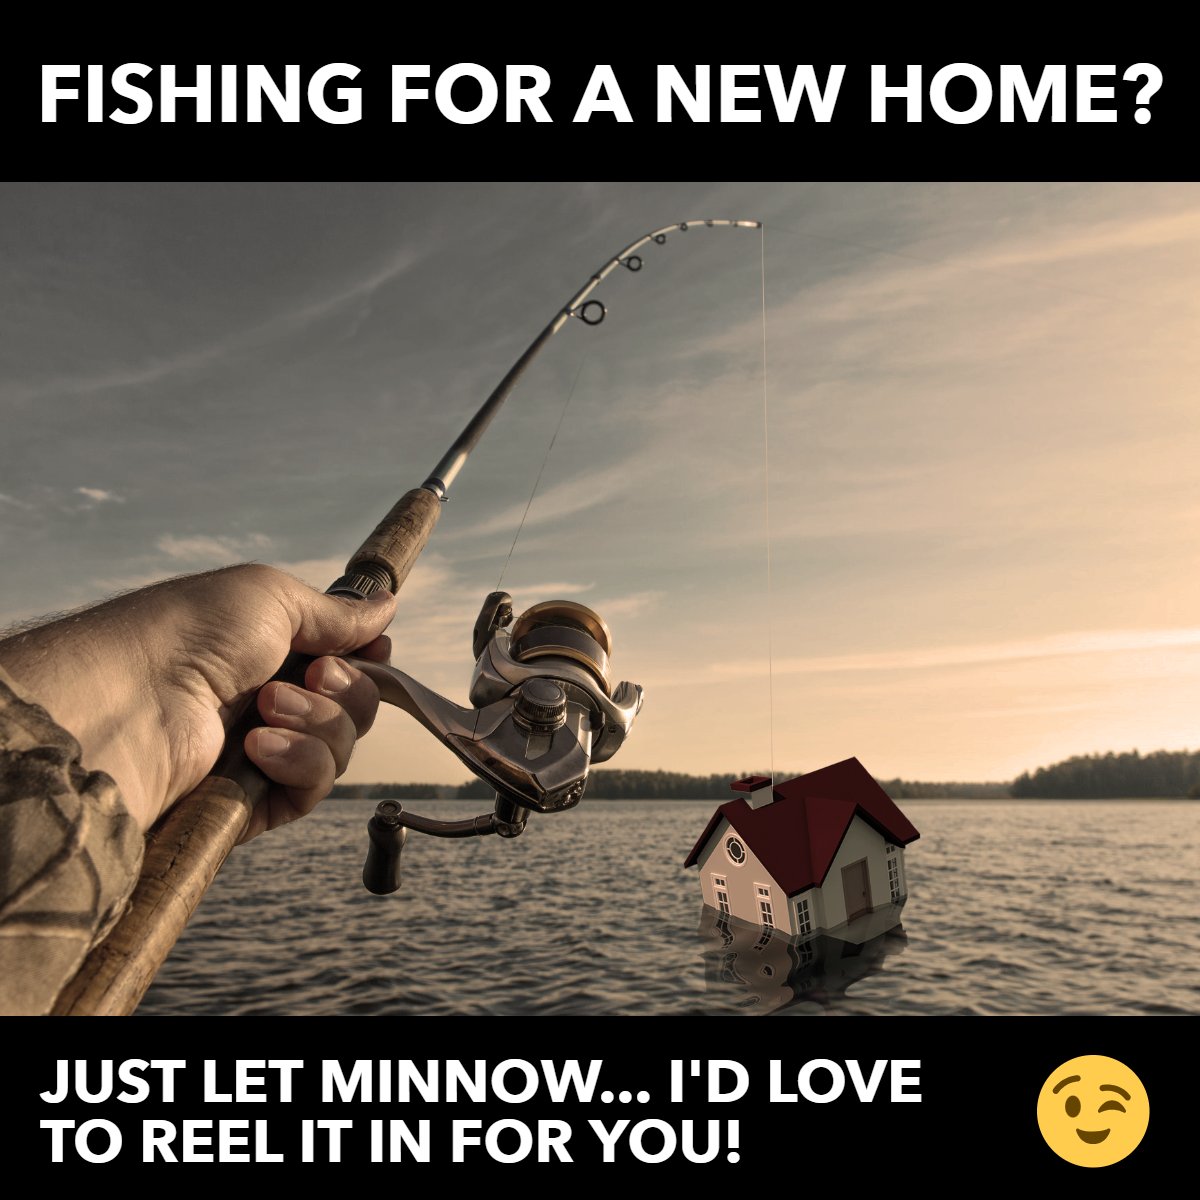 Searching for a new home can feel like fishing 🎣 

Remember, the perfect catch is waiting for you

It's all part of the adventure!

#HouseHunting #RealEstateHumor
 #BattleCreek #Kalamazoo #WhatsMyhomeworth #homevalue #Realtor